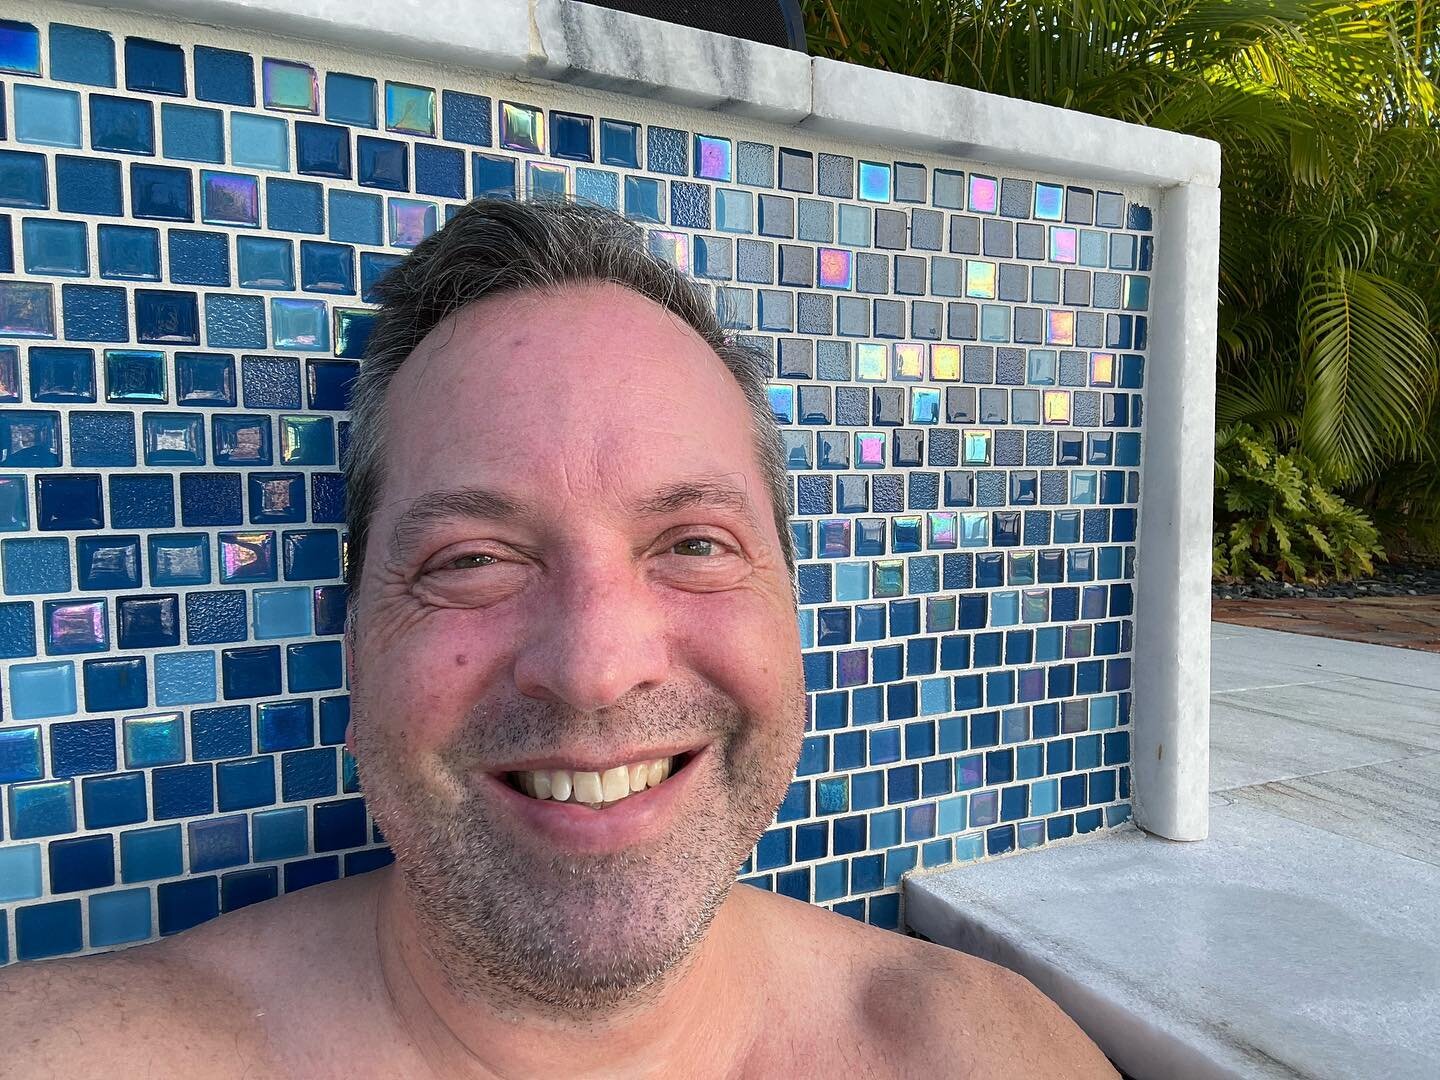 &ldquo;Designing&rdquo; my relaxation time post work! Hope y&rsquo;all have had a beautiful Saturday so far!! #saturday #southflorida #pooltime #lovinglife #relaxation #westpalmbeach